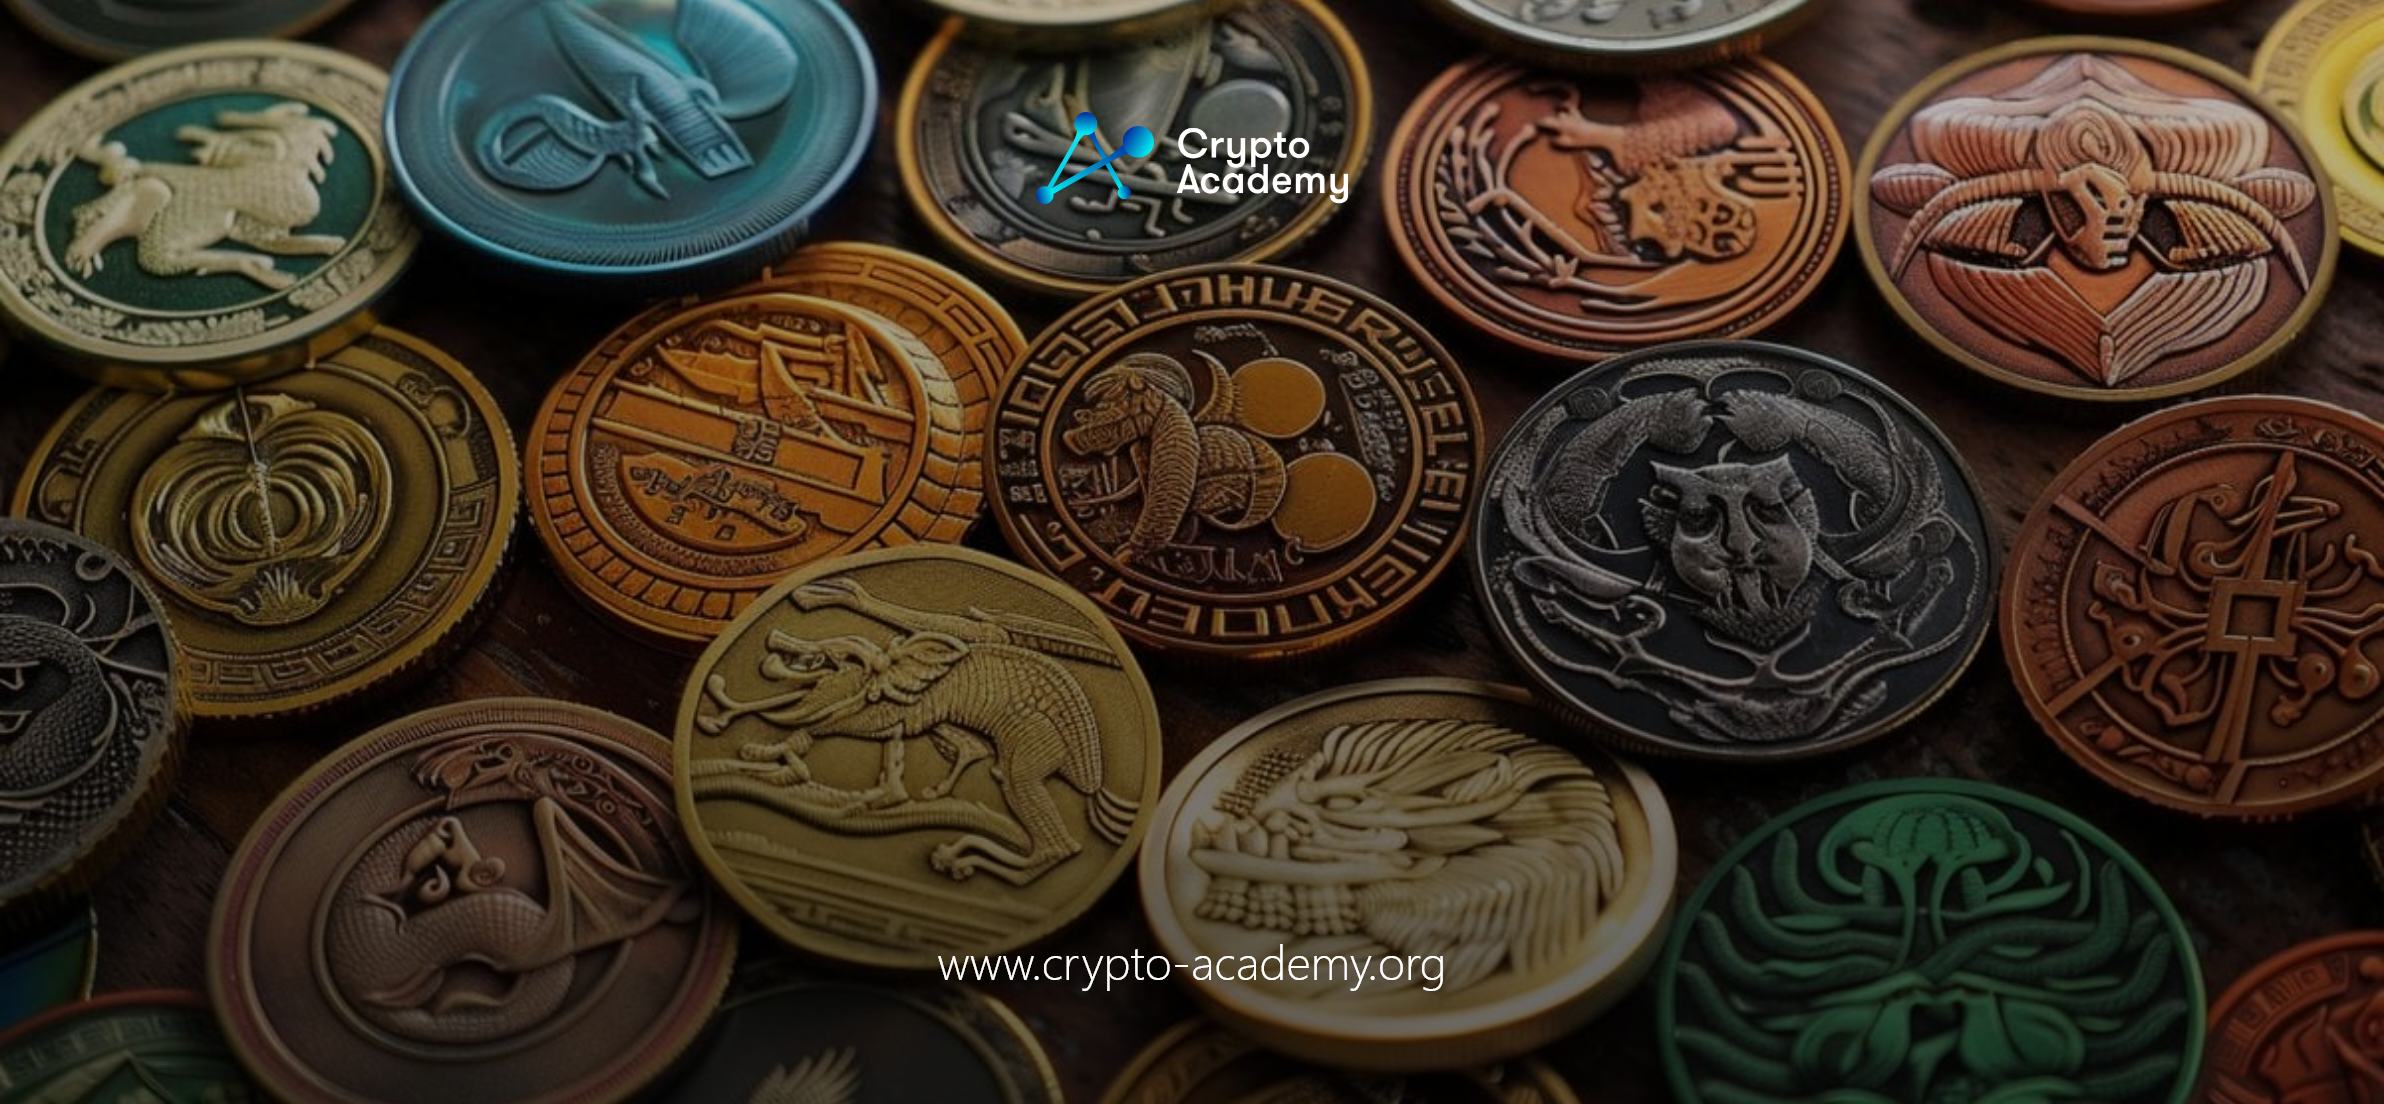 What Are Culture Coins? - The New Trend of Memecoins